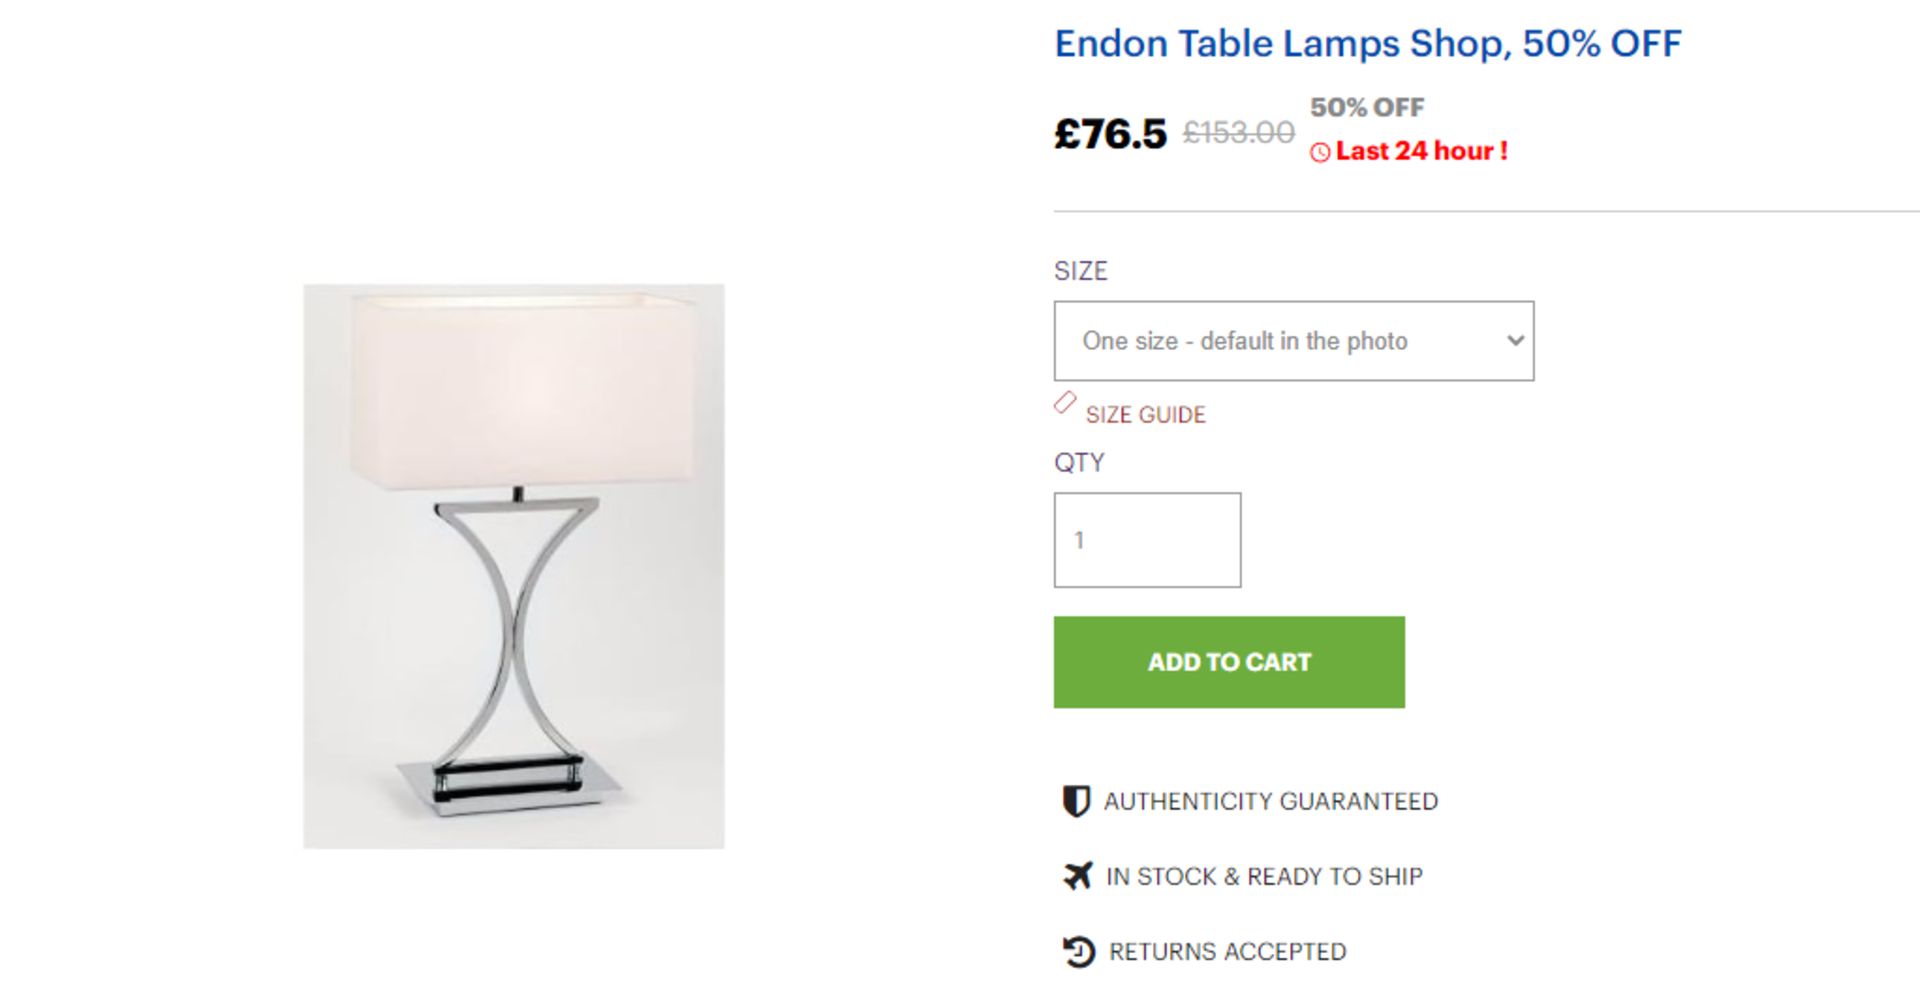 Brand New Endon Lighting Chrome Table Lamp or Bedside Lamp RRP £79.99 - Image 3 of 3